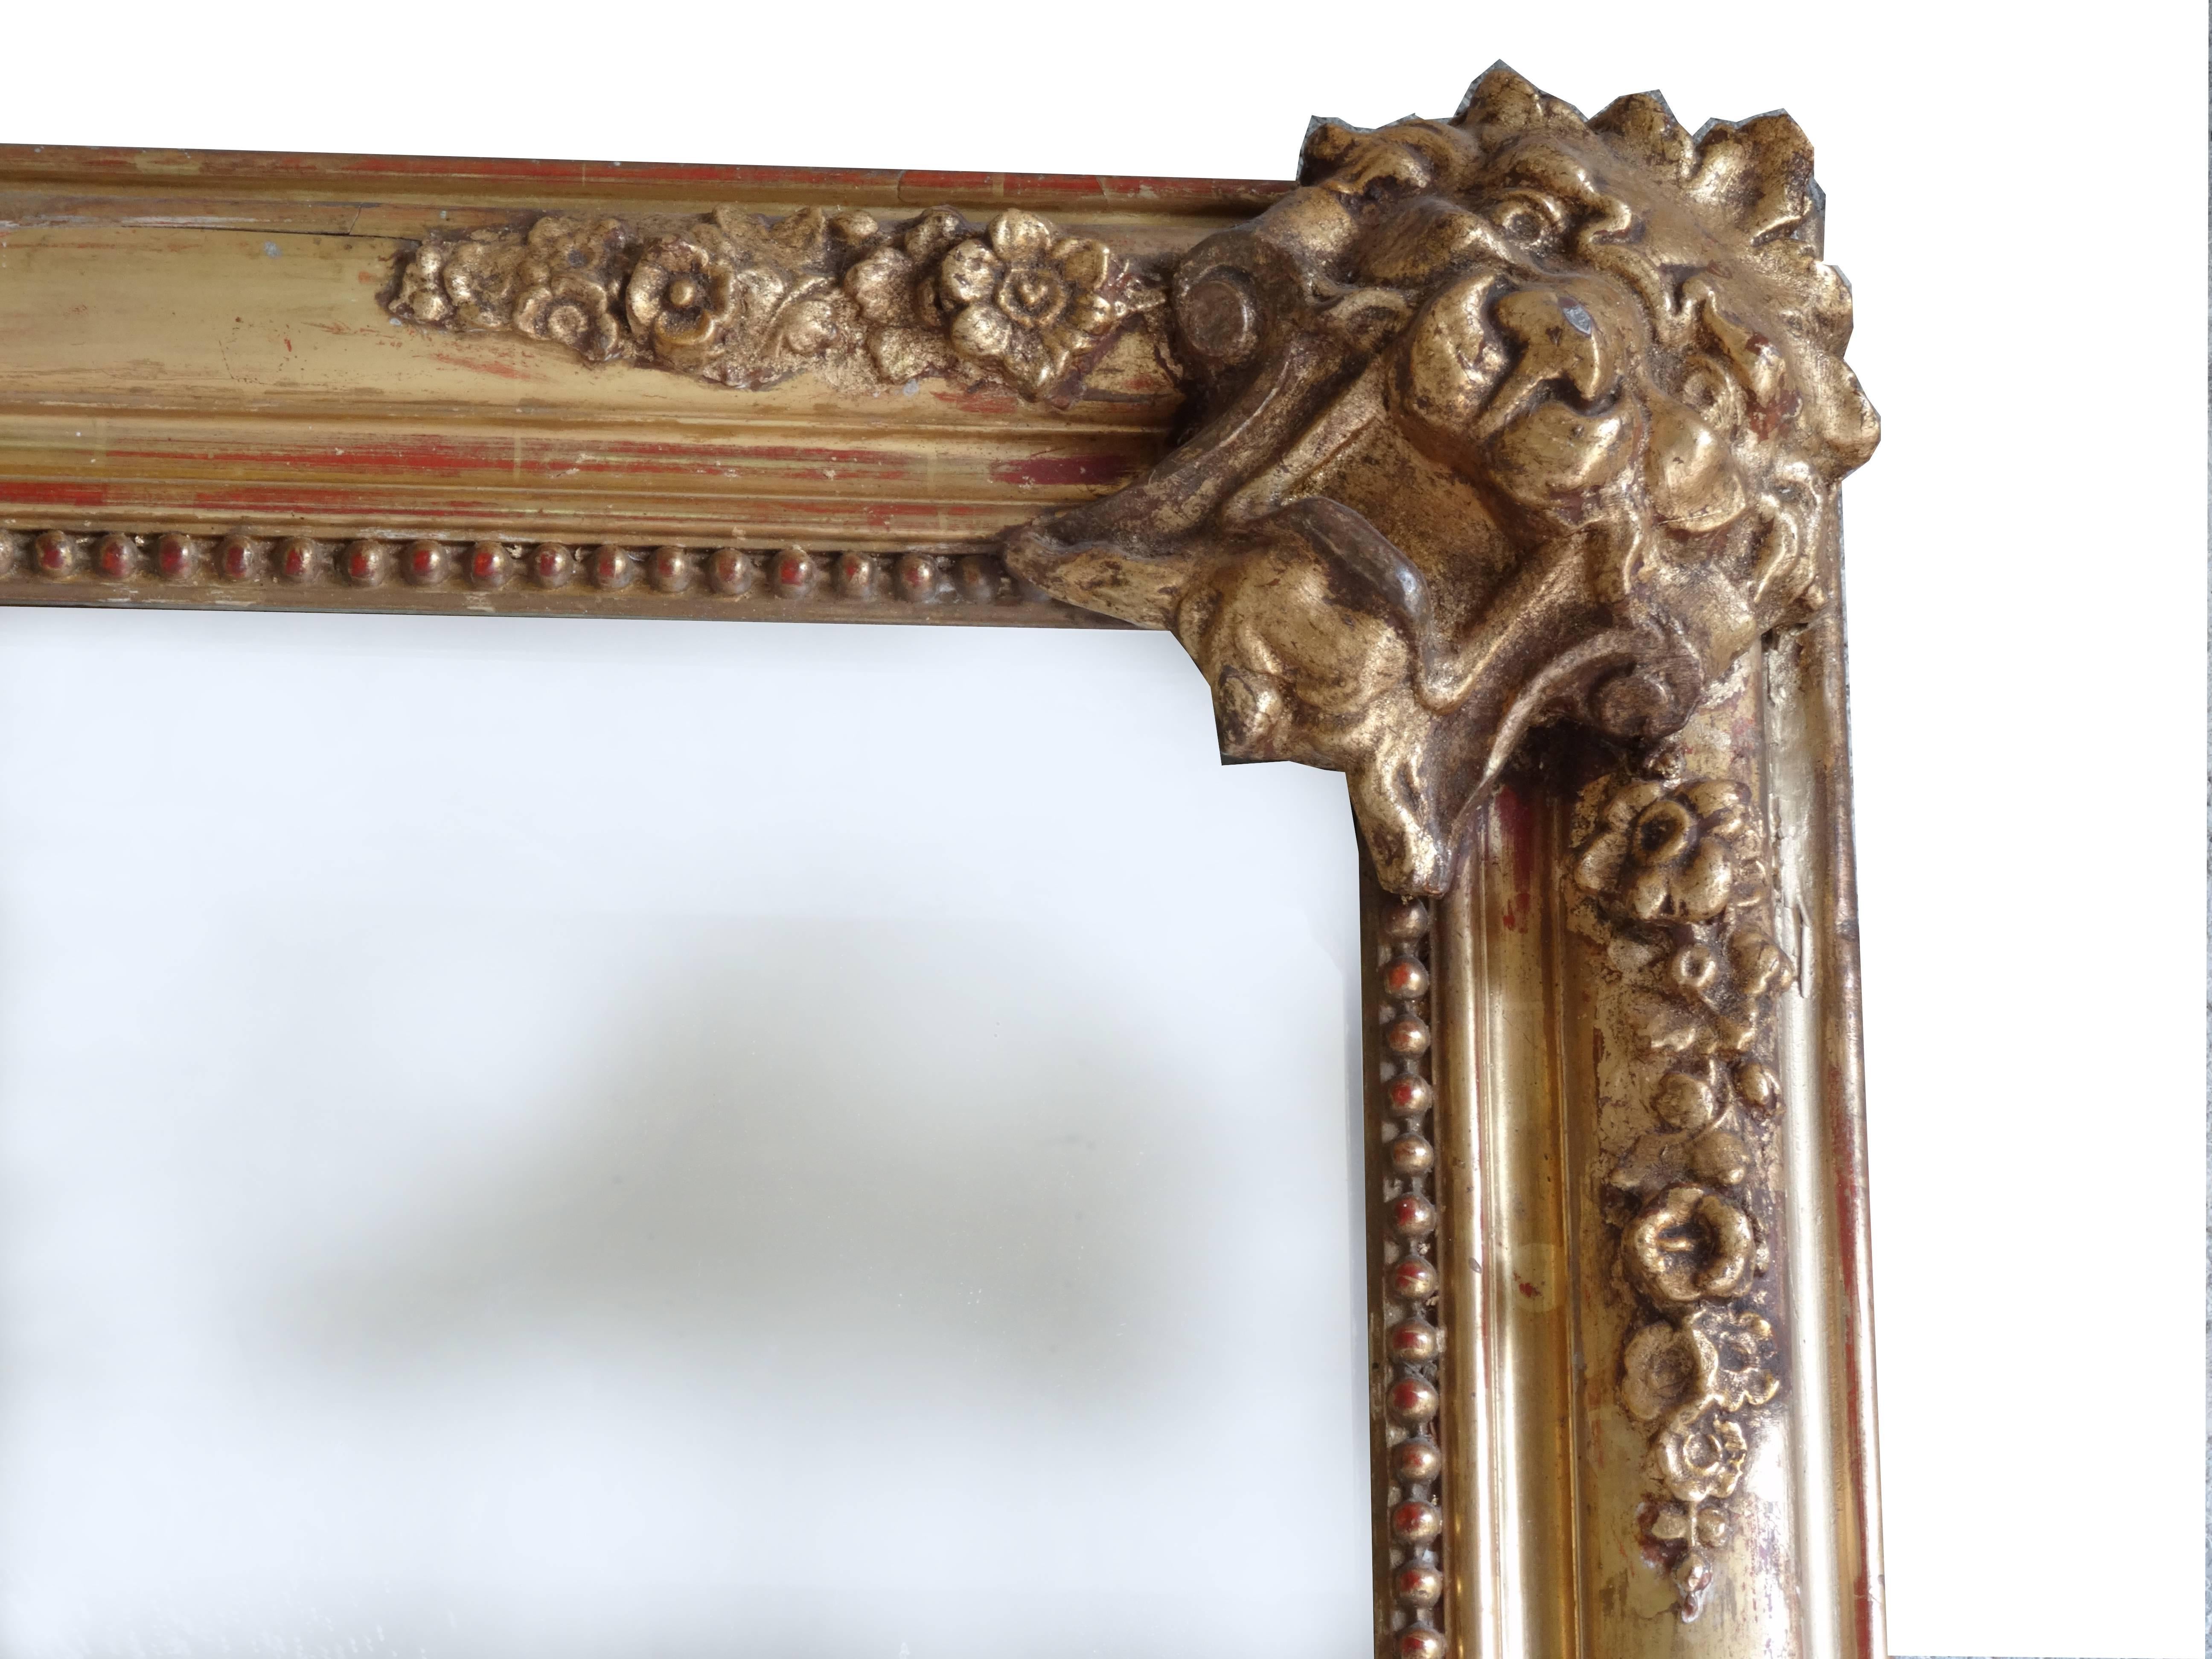 19th century French Regency Style antique mirror; the frame is wood-gilded and the corners are ornate with foliage. A thin row of gilded pearls highlights the framing. The original plate is softly aged. The frame under, shows that the mirror is